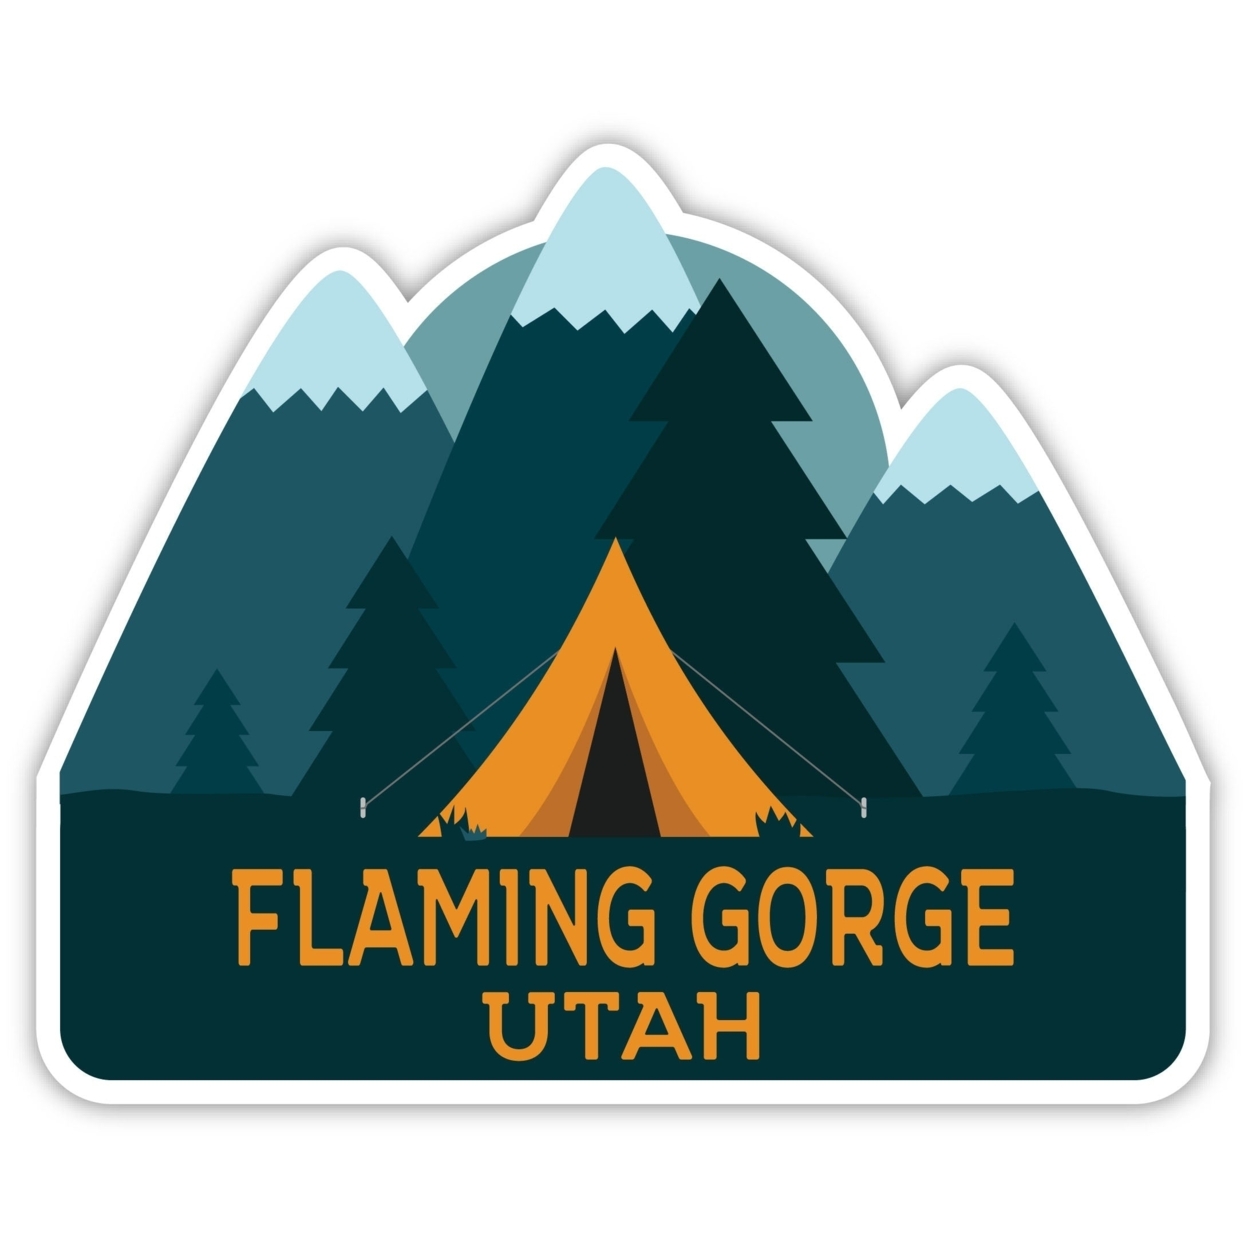 Flaming Gorge Utah Souvenir Decorative Stickers (Choose Theme And Size) - 4-Pack, 6-Inch, Camp Life